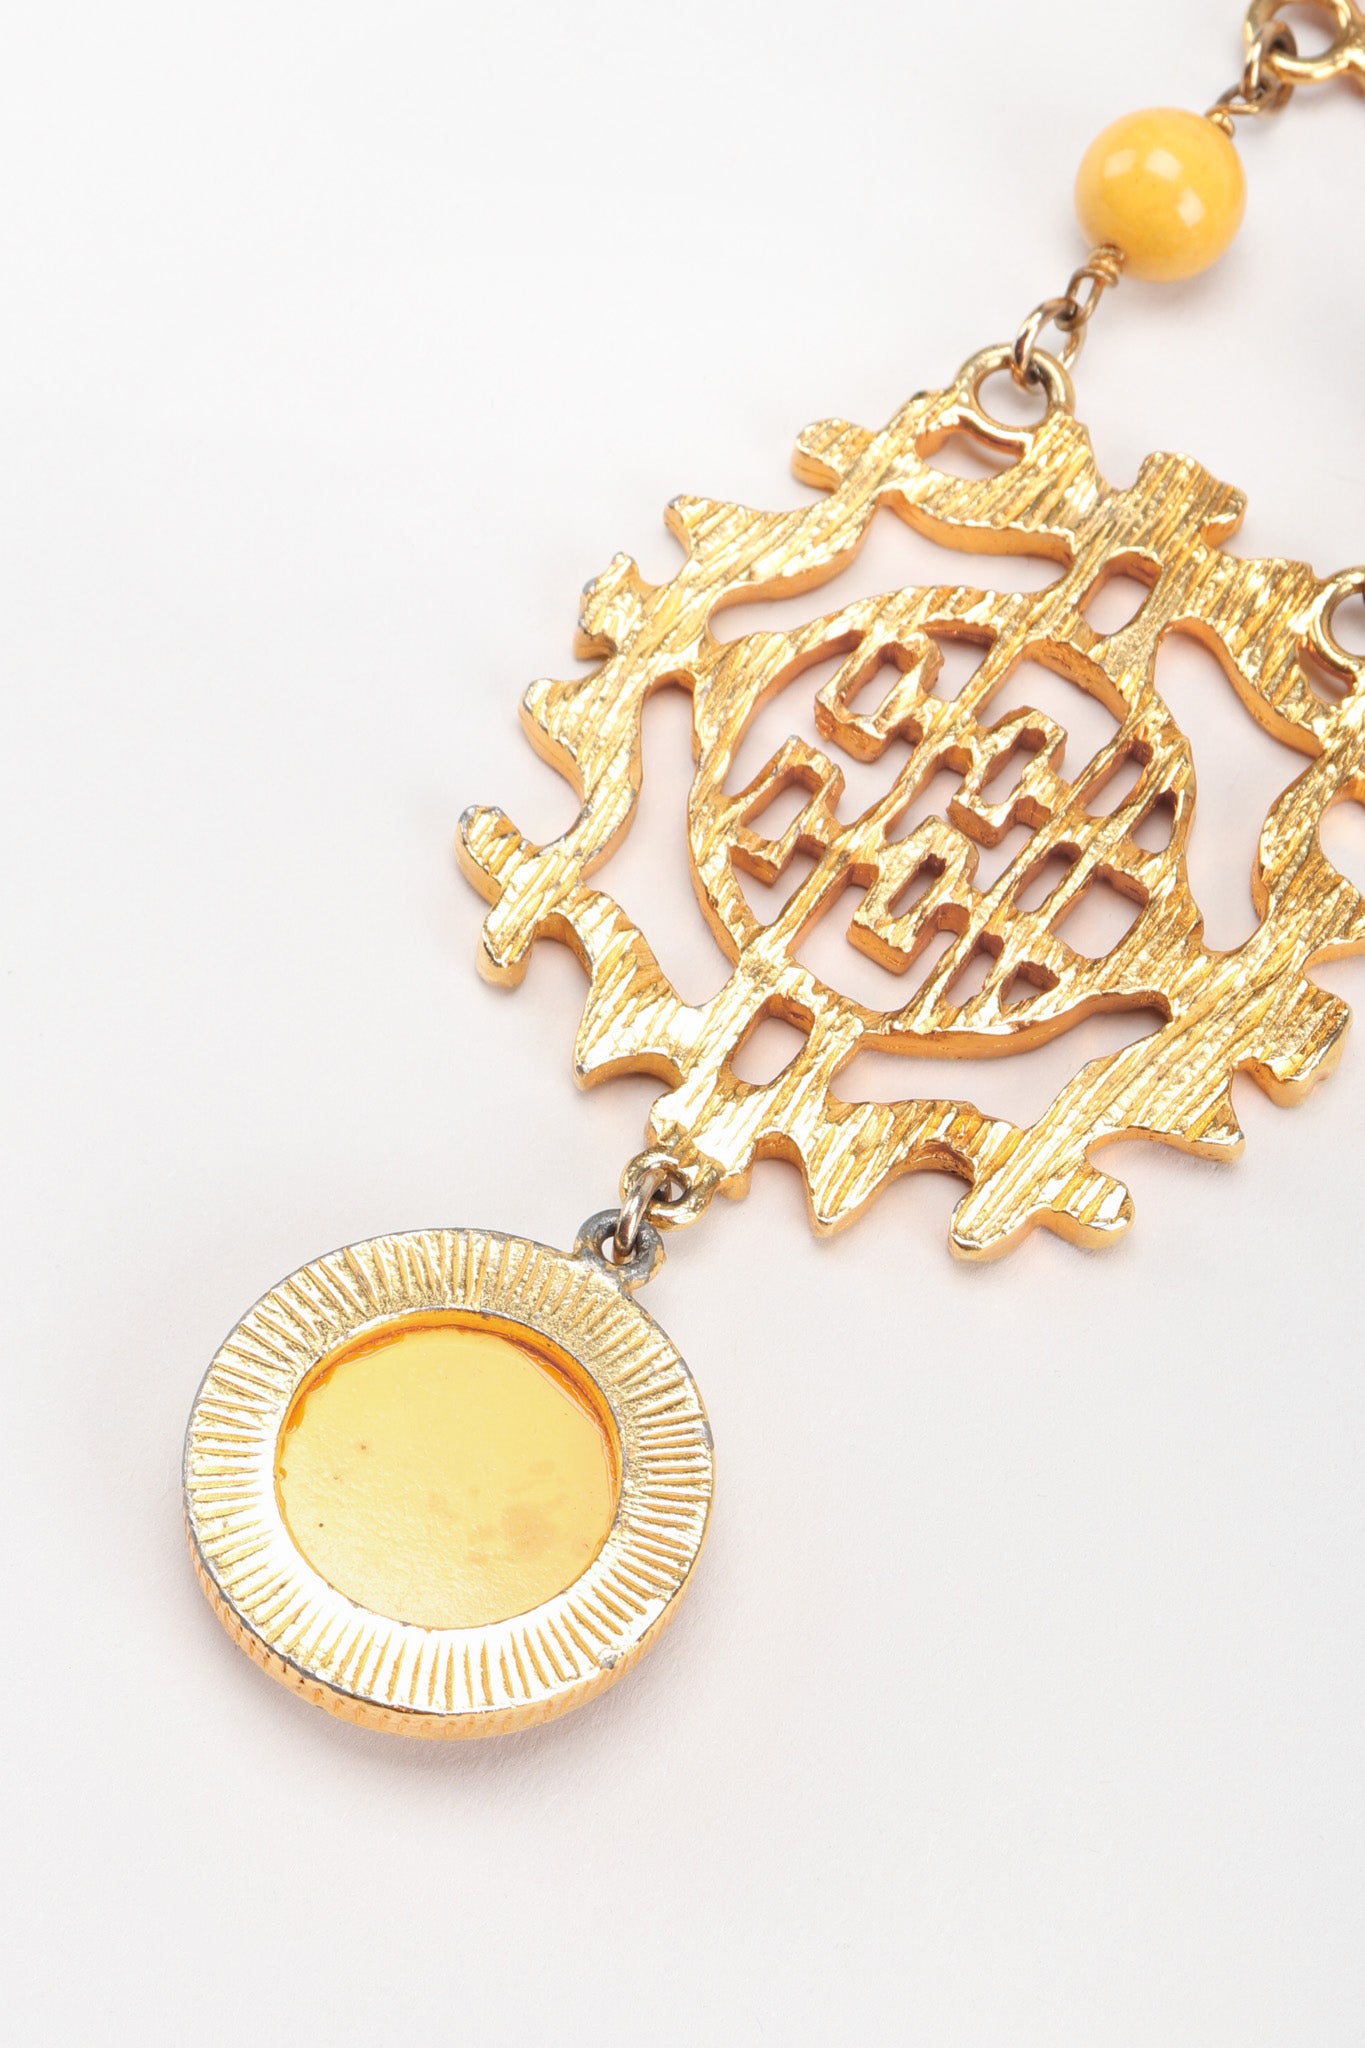 Recess Los Angeles Vintage Cadoro Double Happiness Chinese Wedding Marriage Pendant Plate Necklace